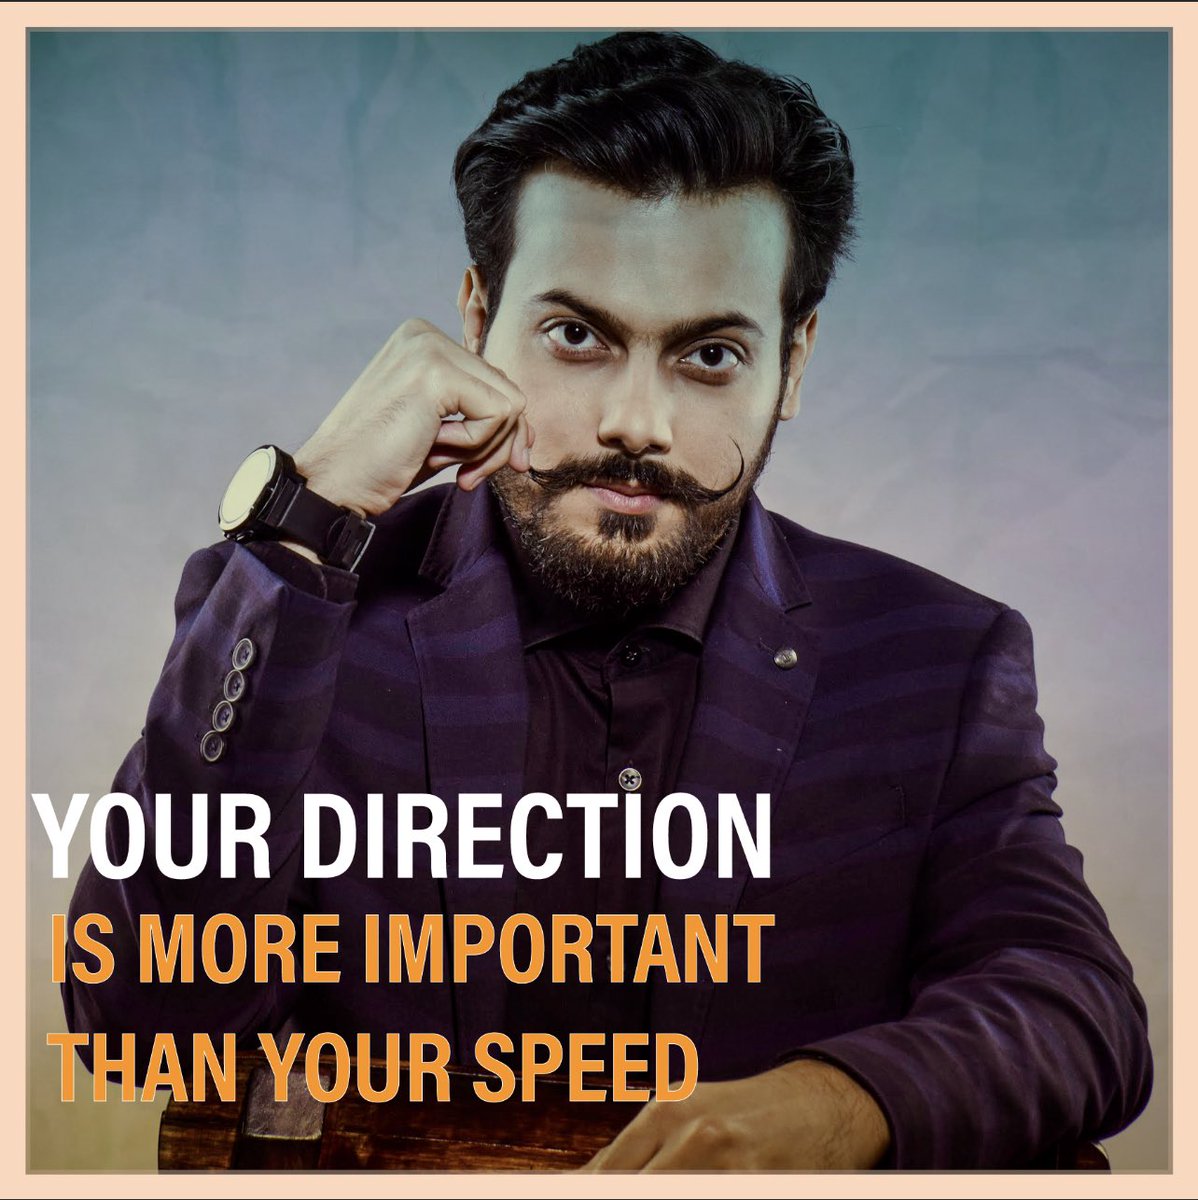 Your direction is more important than your speed
.
.
#riseoo #risewithriseoo #eazme #drkshitij #affiliatepartners #affiliatemarketing #networkmarketing #networkmarketingsuccess #lifestyleproducts #changinglivestogether #affiliatemarketingtips #successstories #mustachesbrothers